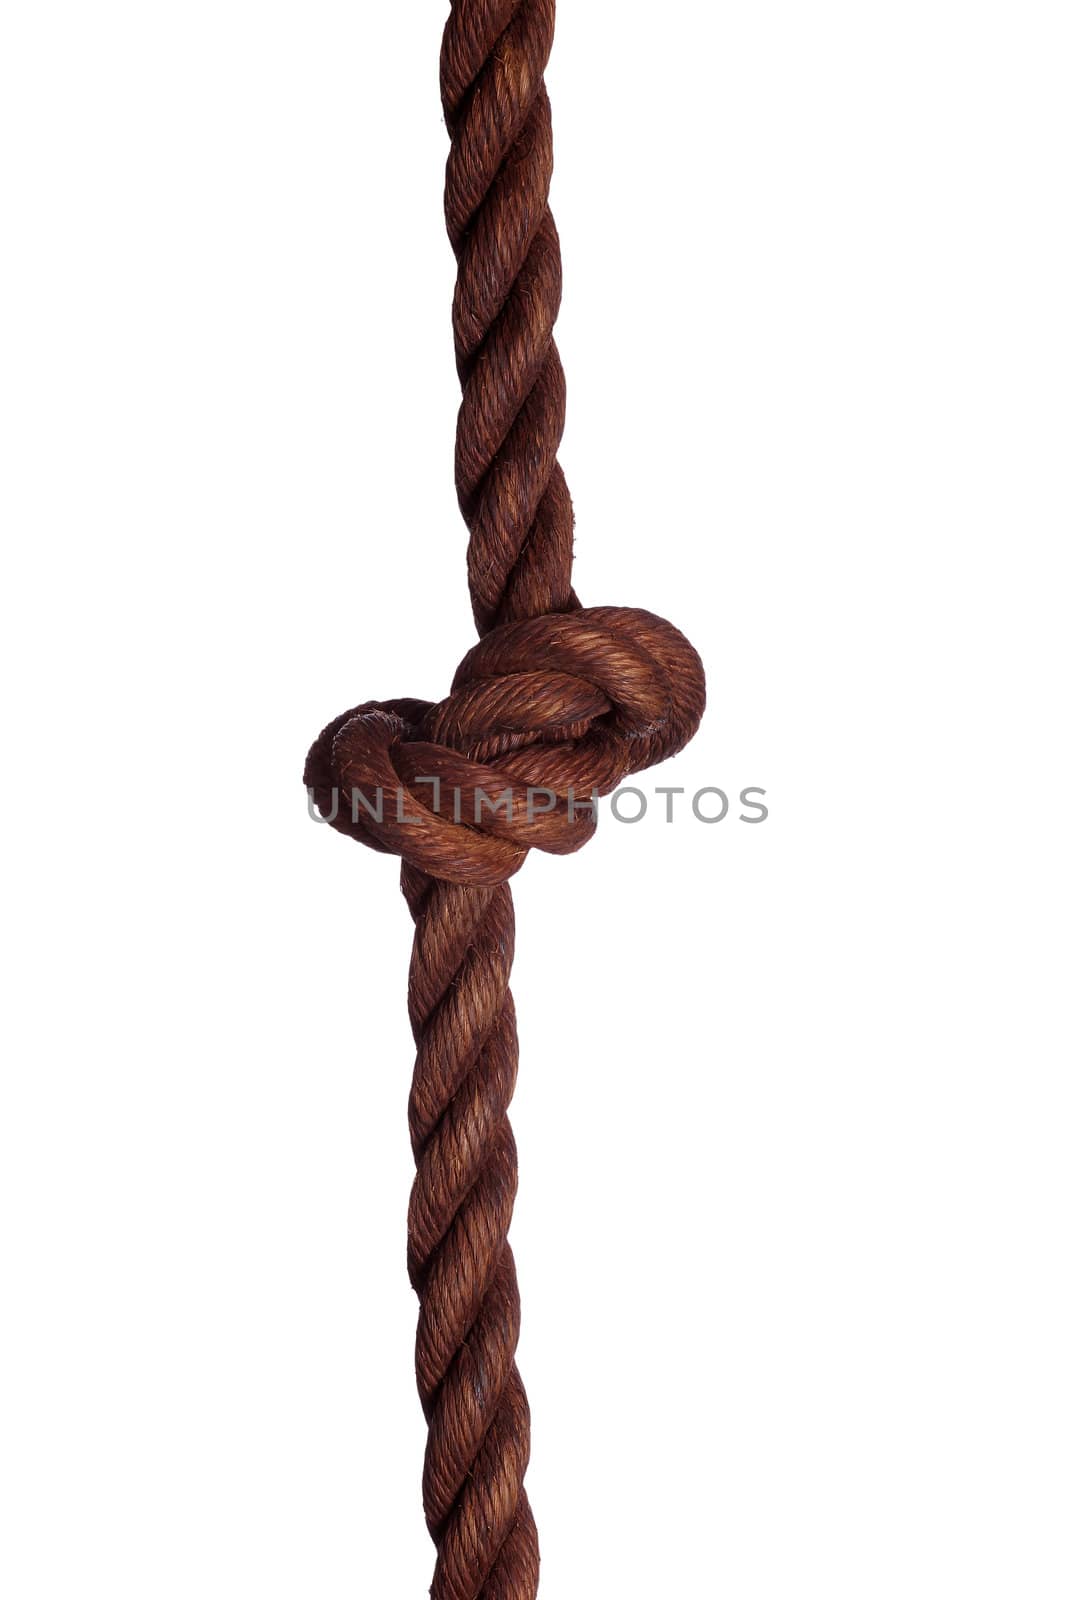 very old rope with knot